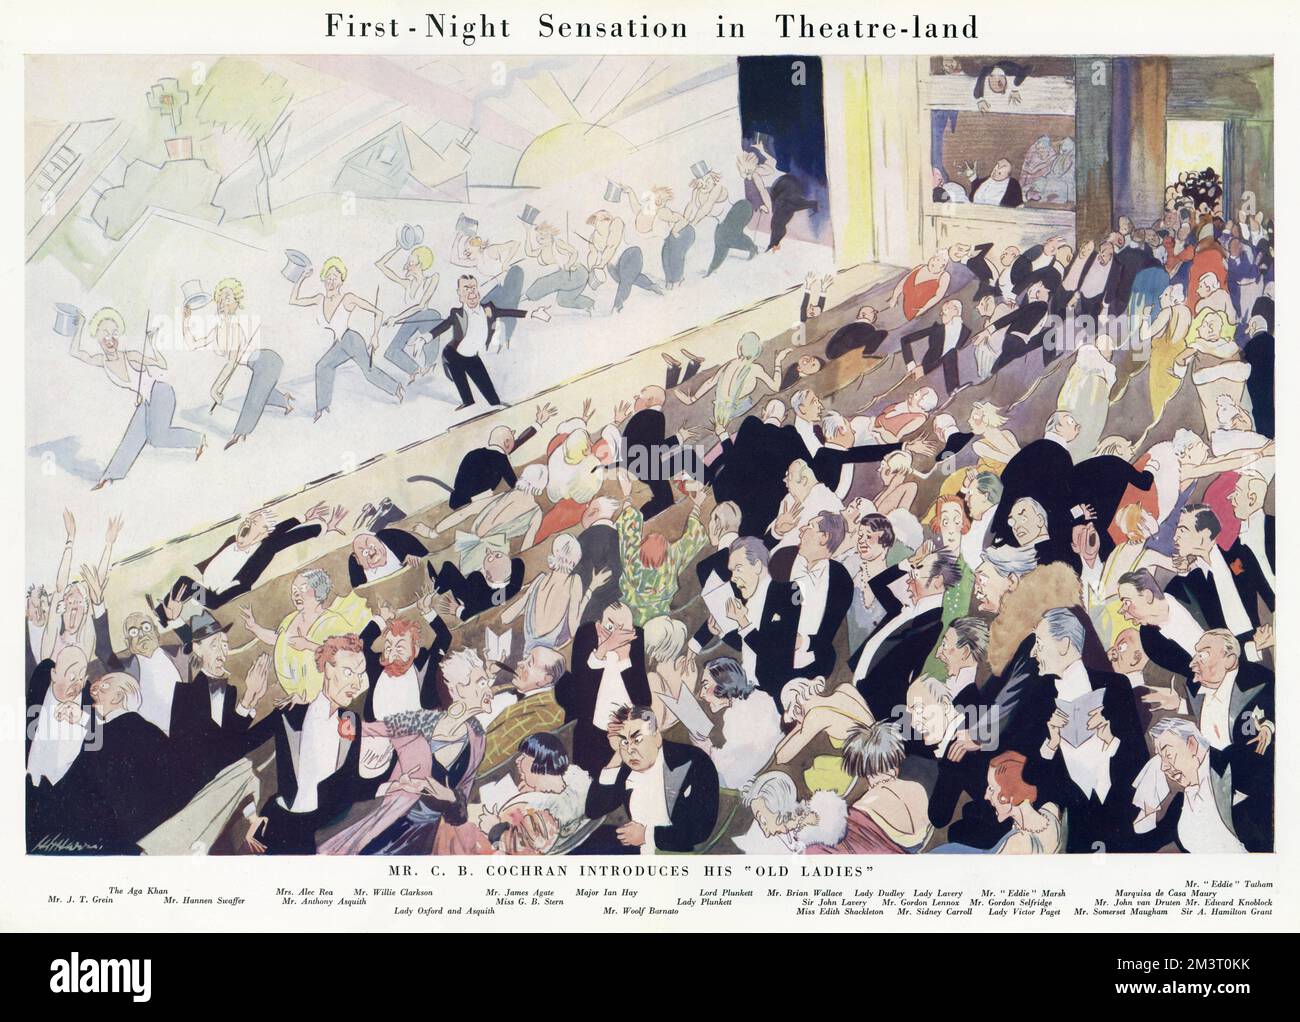 Brilliant illustration by H. H. Harris imagining the scene in a theatre if impresario C. B. Cochran introduced his 'old' rather than the usual 'young ladies'. As a chorus line of geriatrics high kick their way across the stage, all of smart society expresses shock. The caption annotates all the figures depicted but among them are the Aga Khan, Lady Asquith with her son Anthony, Woolf Barnato, Sir John and Lady Lavery, Gordon Selfridge and Somerset Maugham.      Date: 1932 Stock Photo